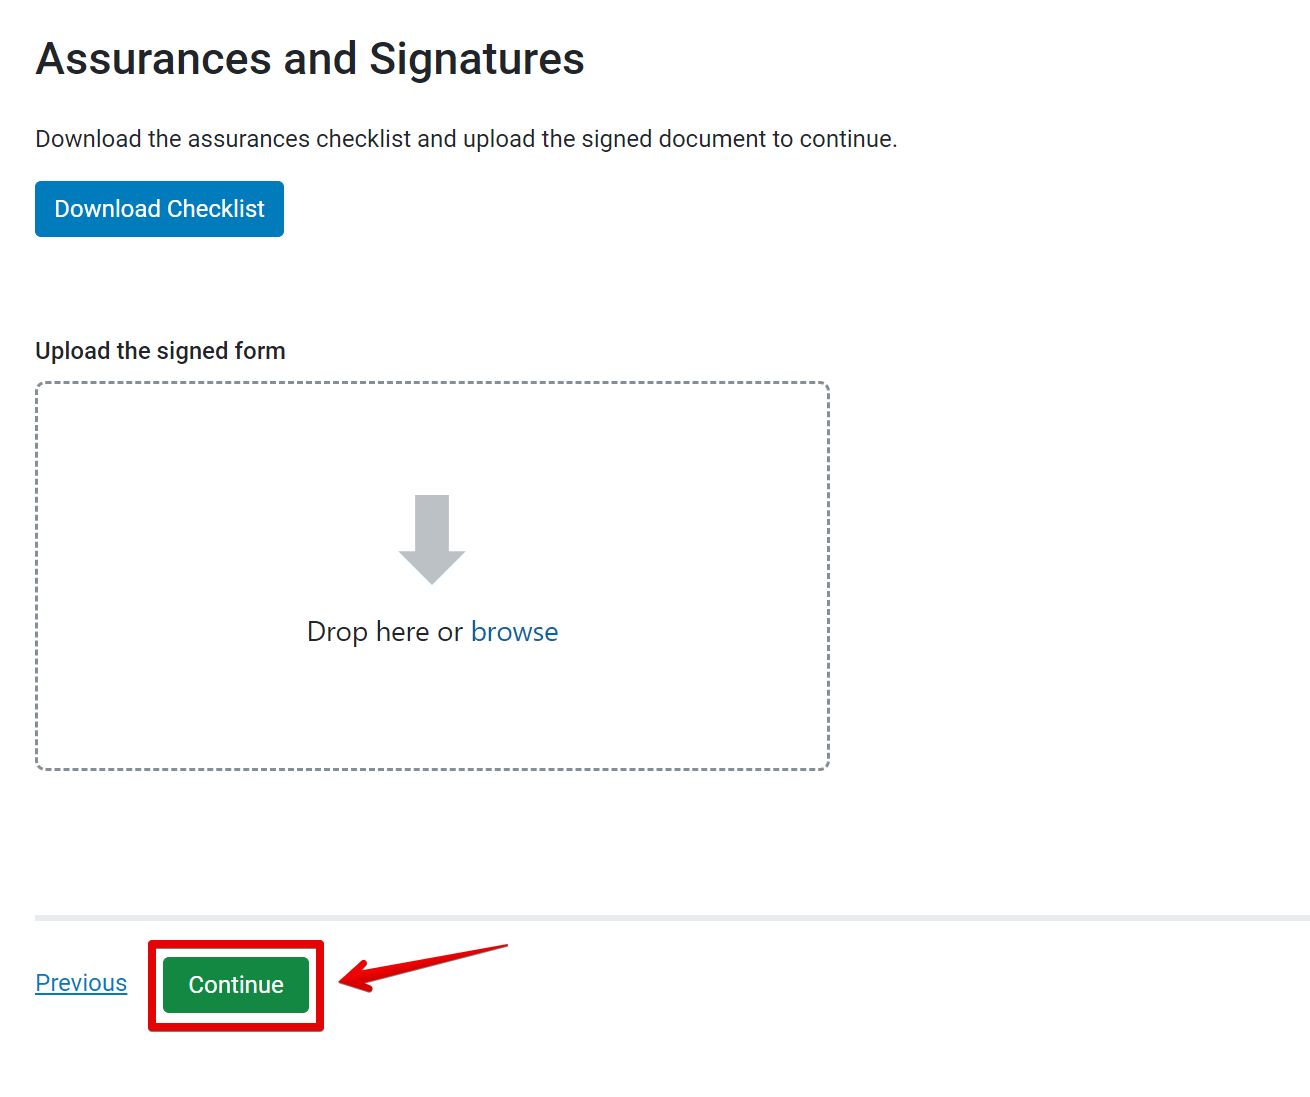 Upload signed form and continue